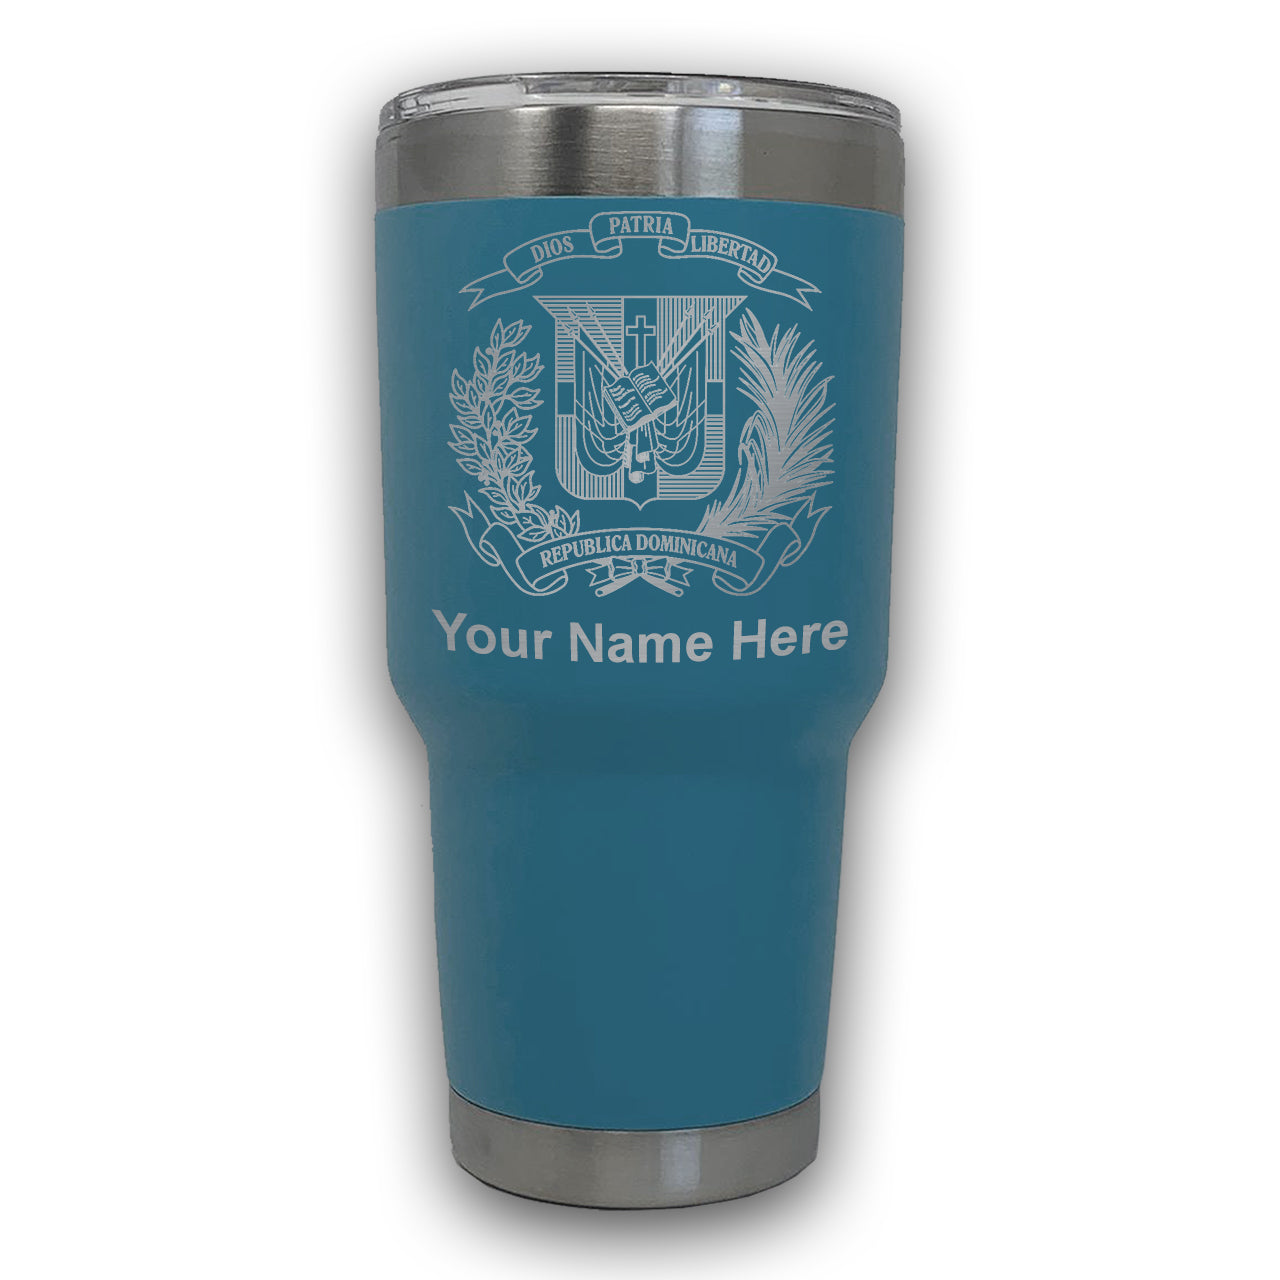 LaserGram 30oz Tumbler Mug, Coat of Arms Dominican Republic, Personalized Engraving Included